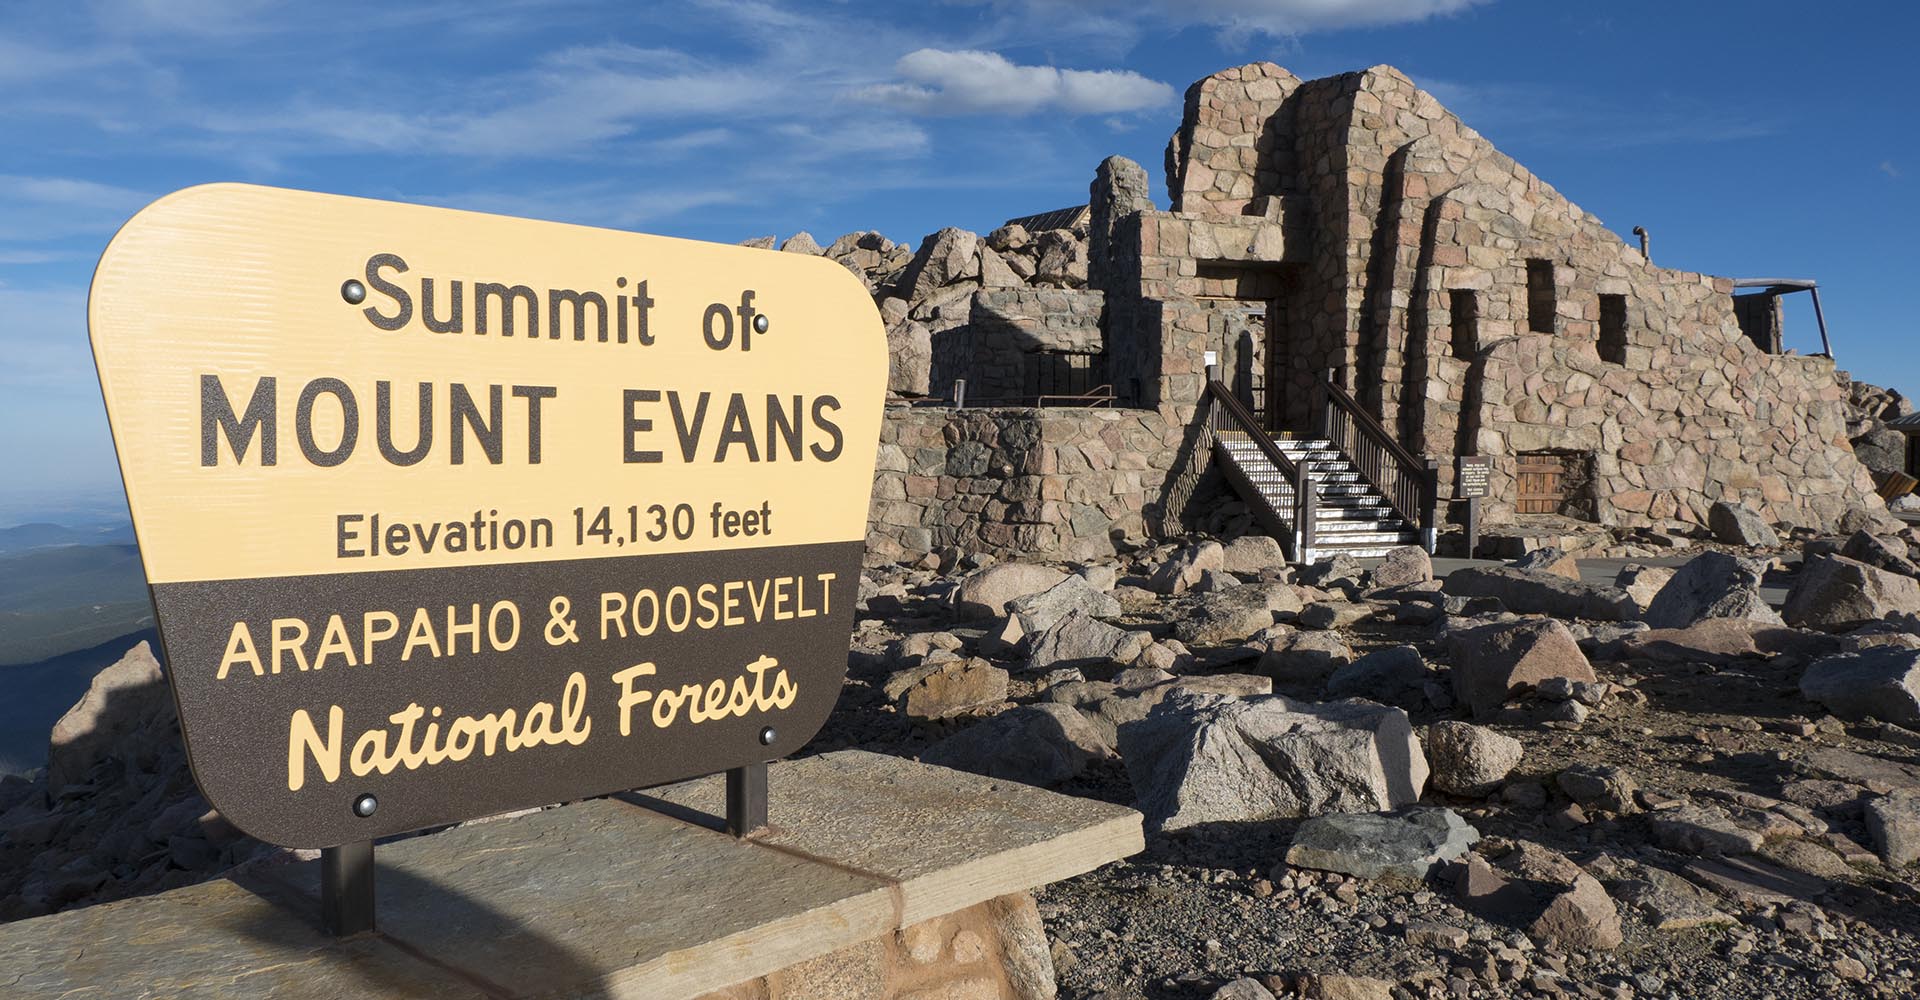 Photo of the Mt. Evans summit with sign and brick structure